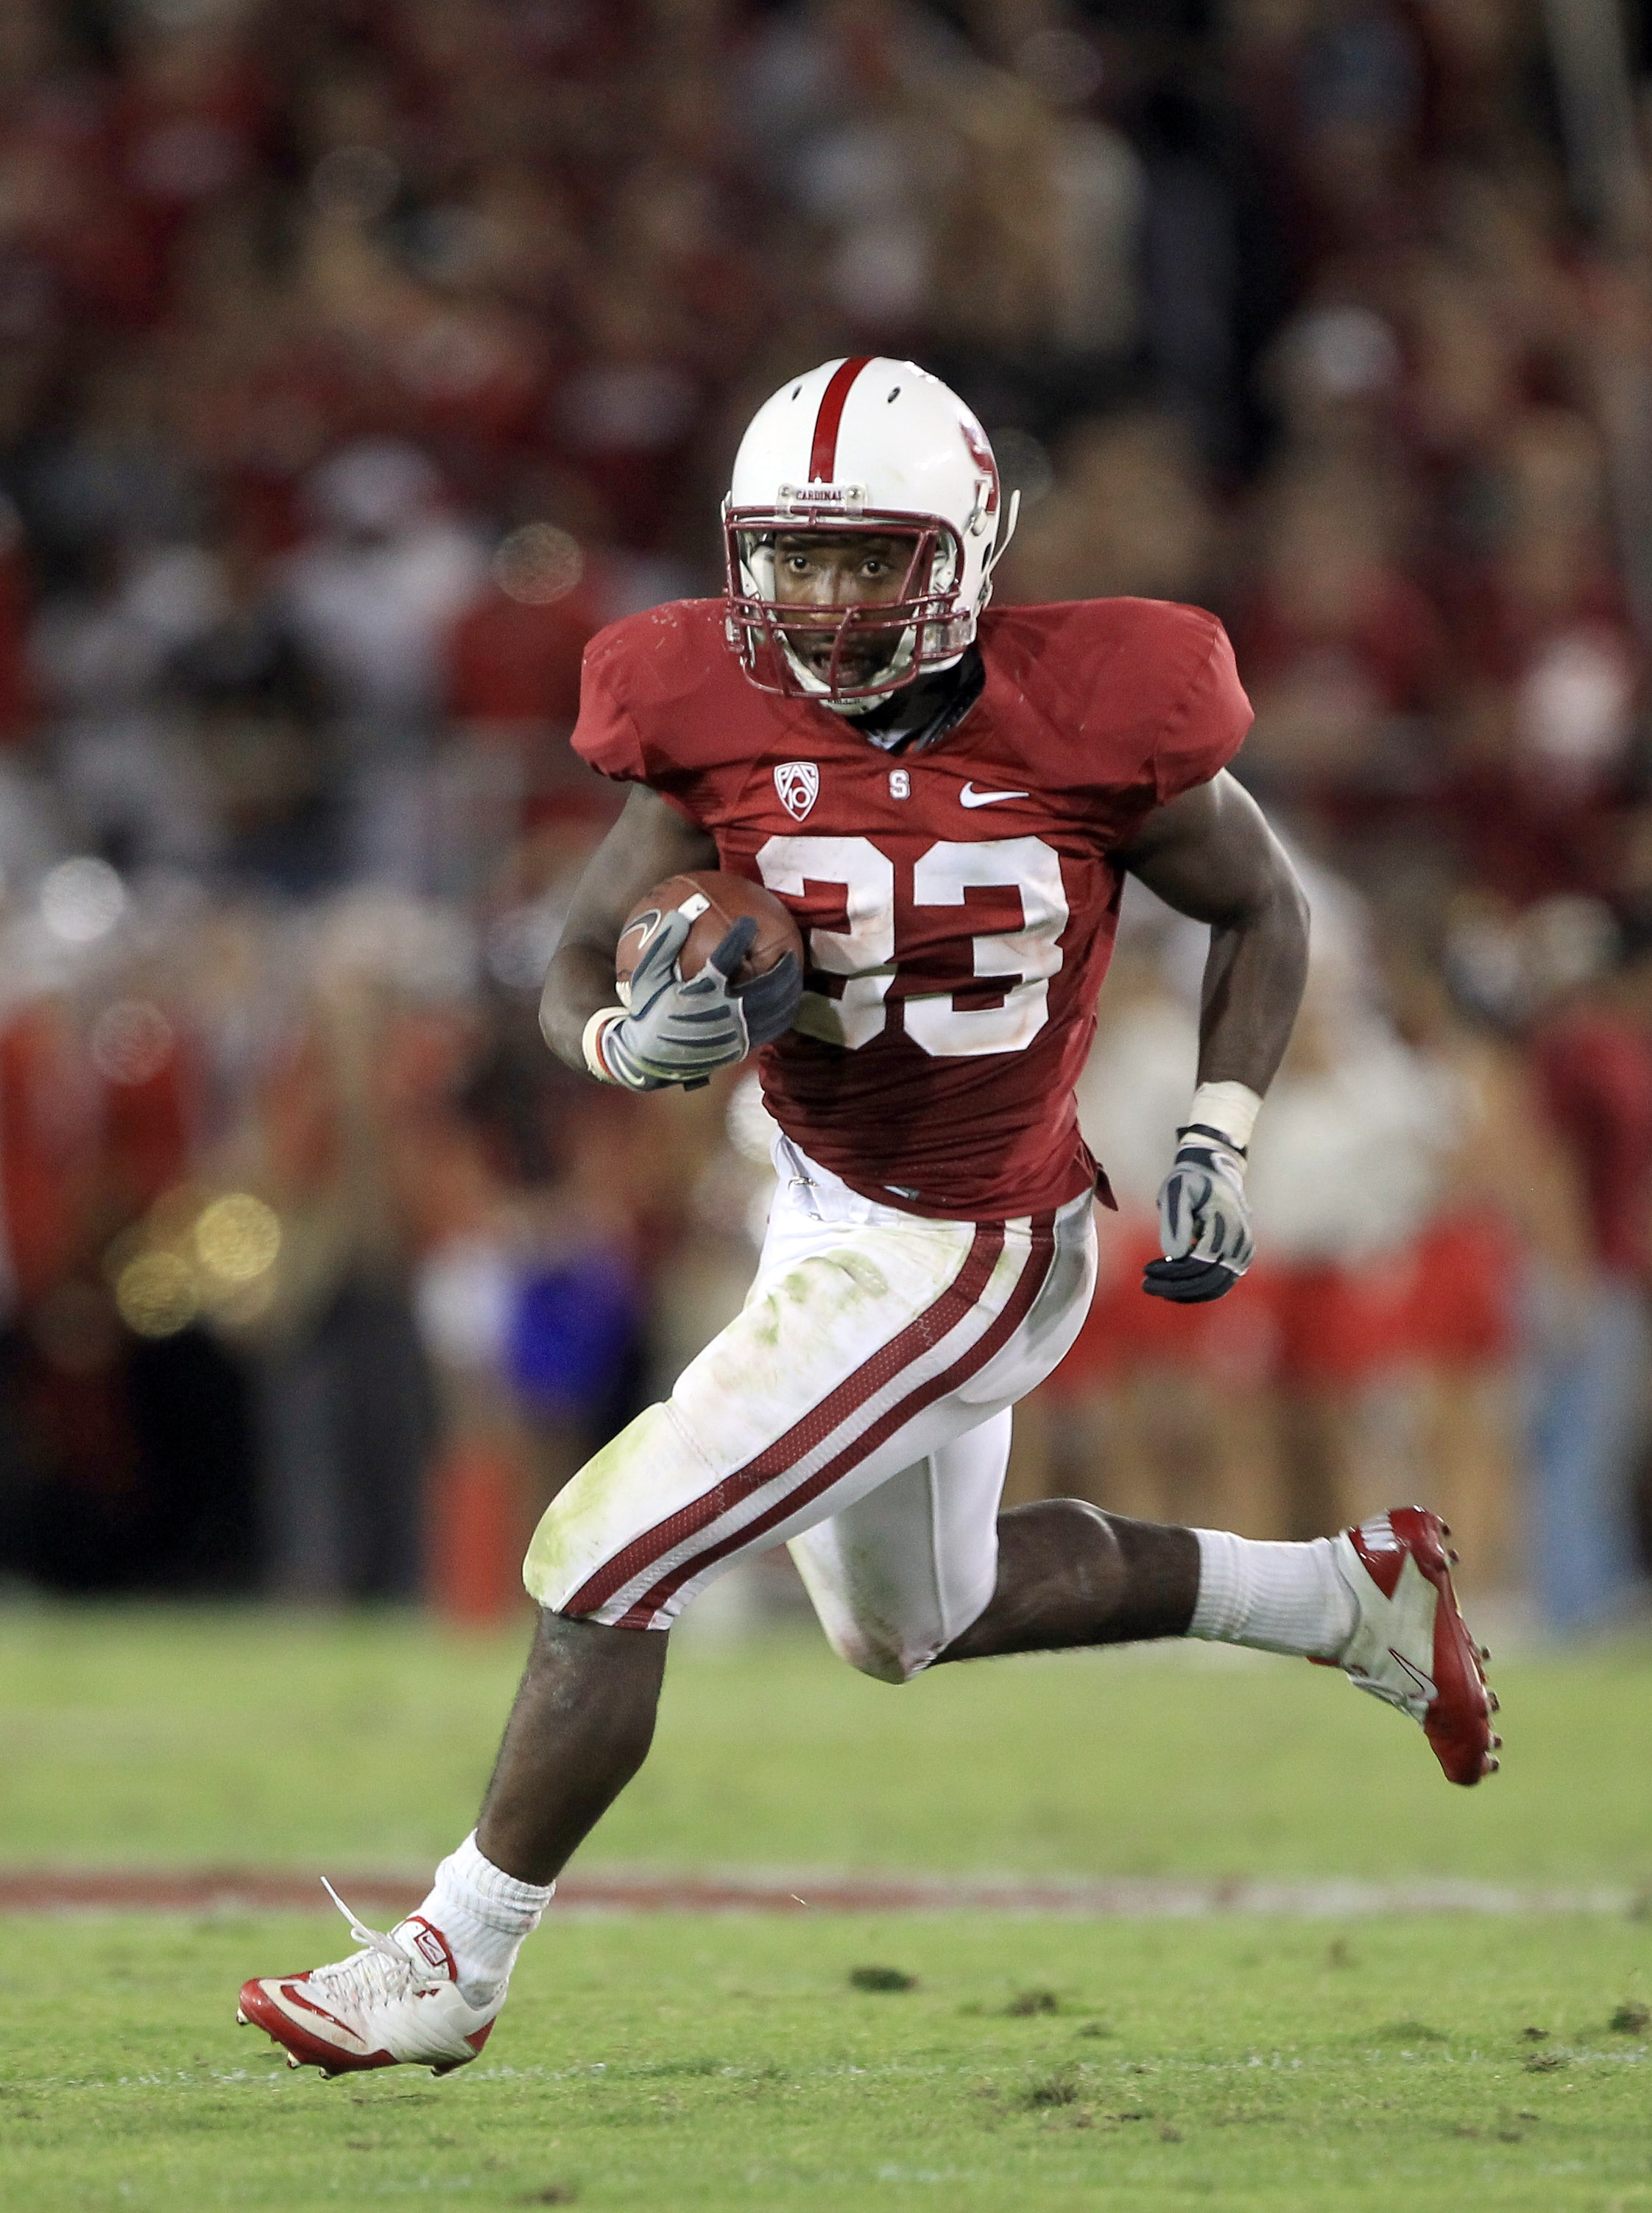 PALO ALTO, CA - OCTOBER 09:  Stepfan Taylor #33 of the Stanford Cardinal runs with the ball against the USC Trojans at Stanford Stadium on October 9, 2010 in Palo Alto, California.  (Photo by Ezra Shaw/Getty Images)